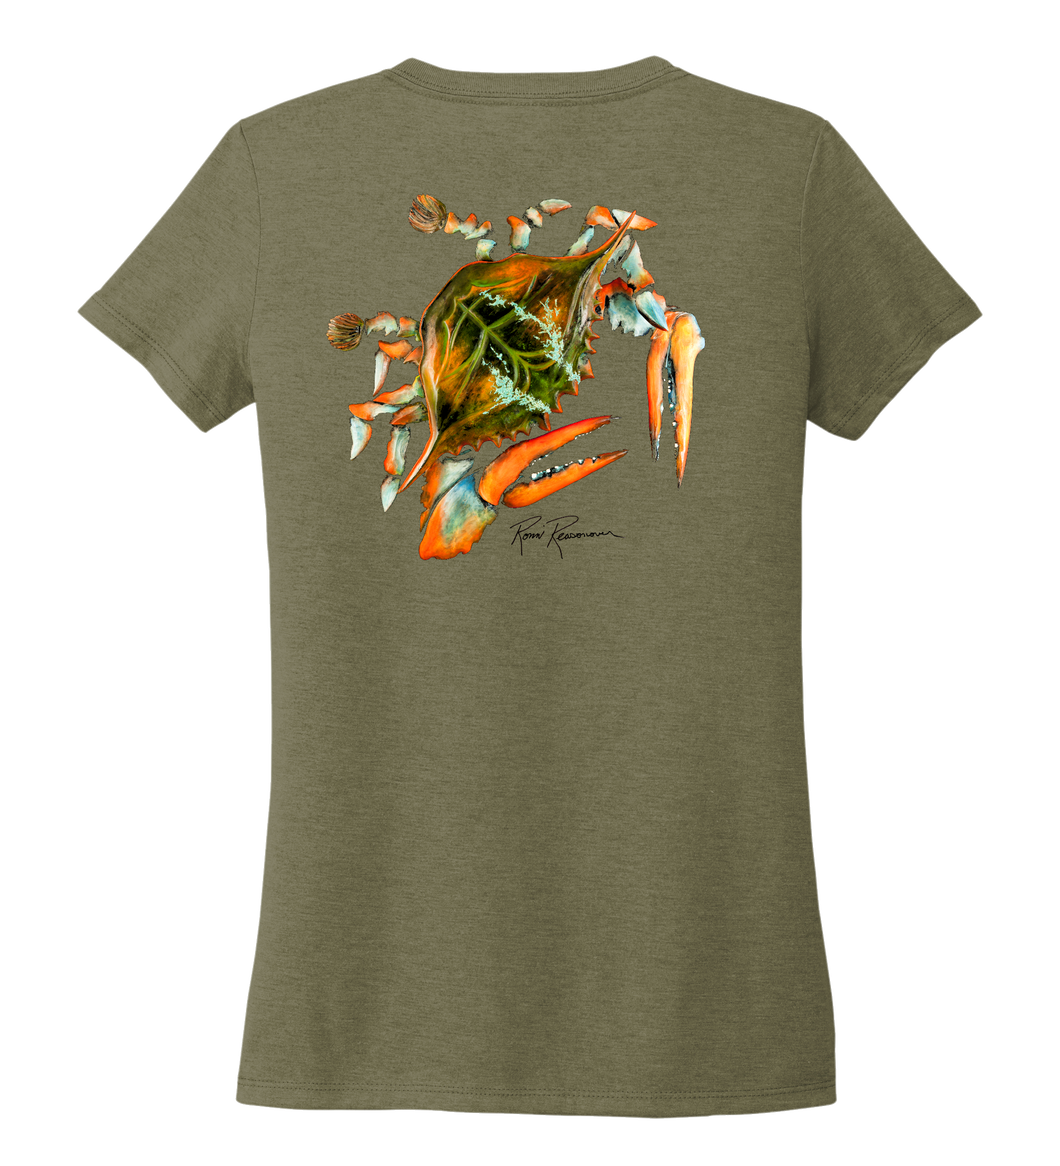 Ronnie Reasonover, The Crab, Women's V-neck T-shirt in Earthy Green